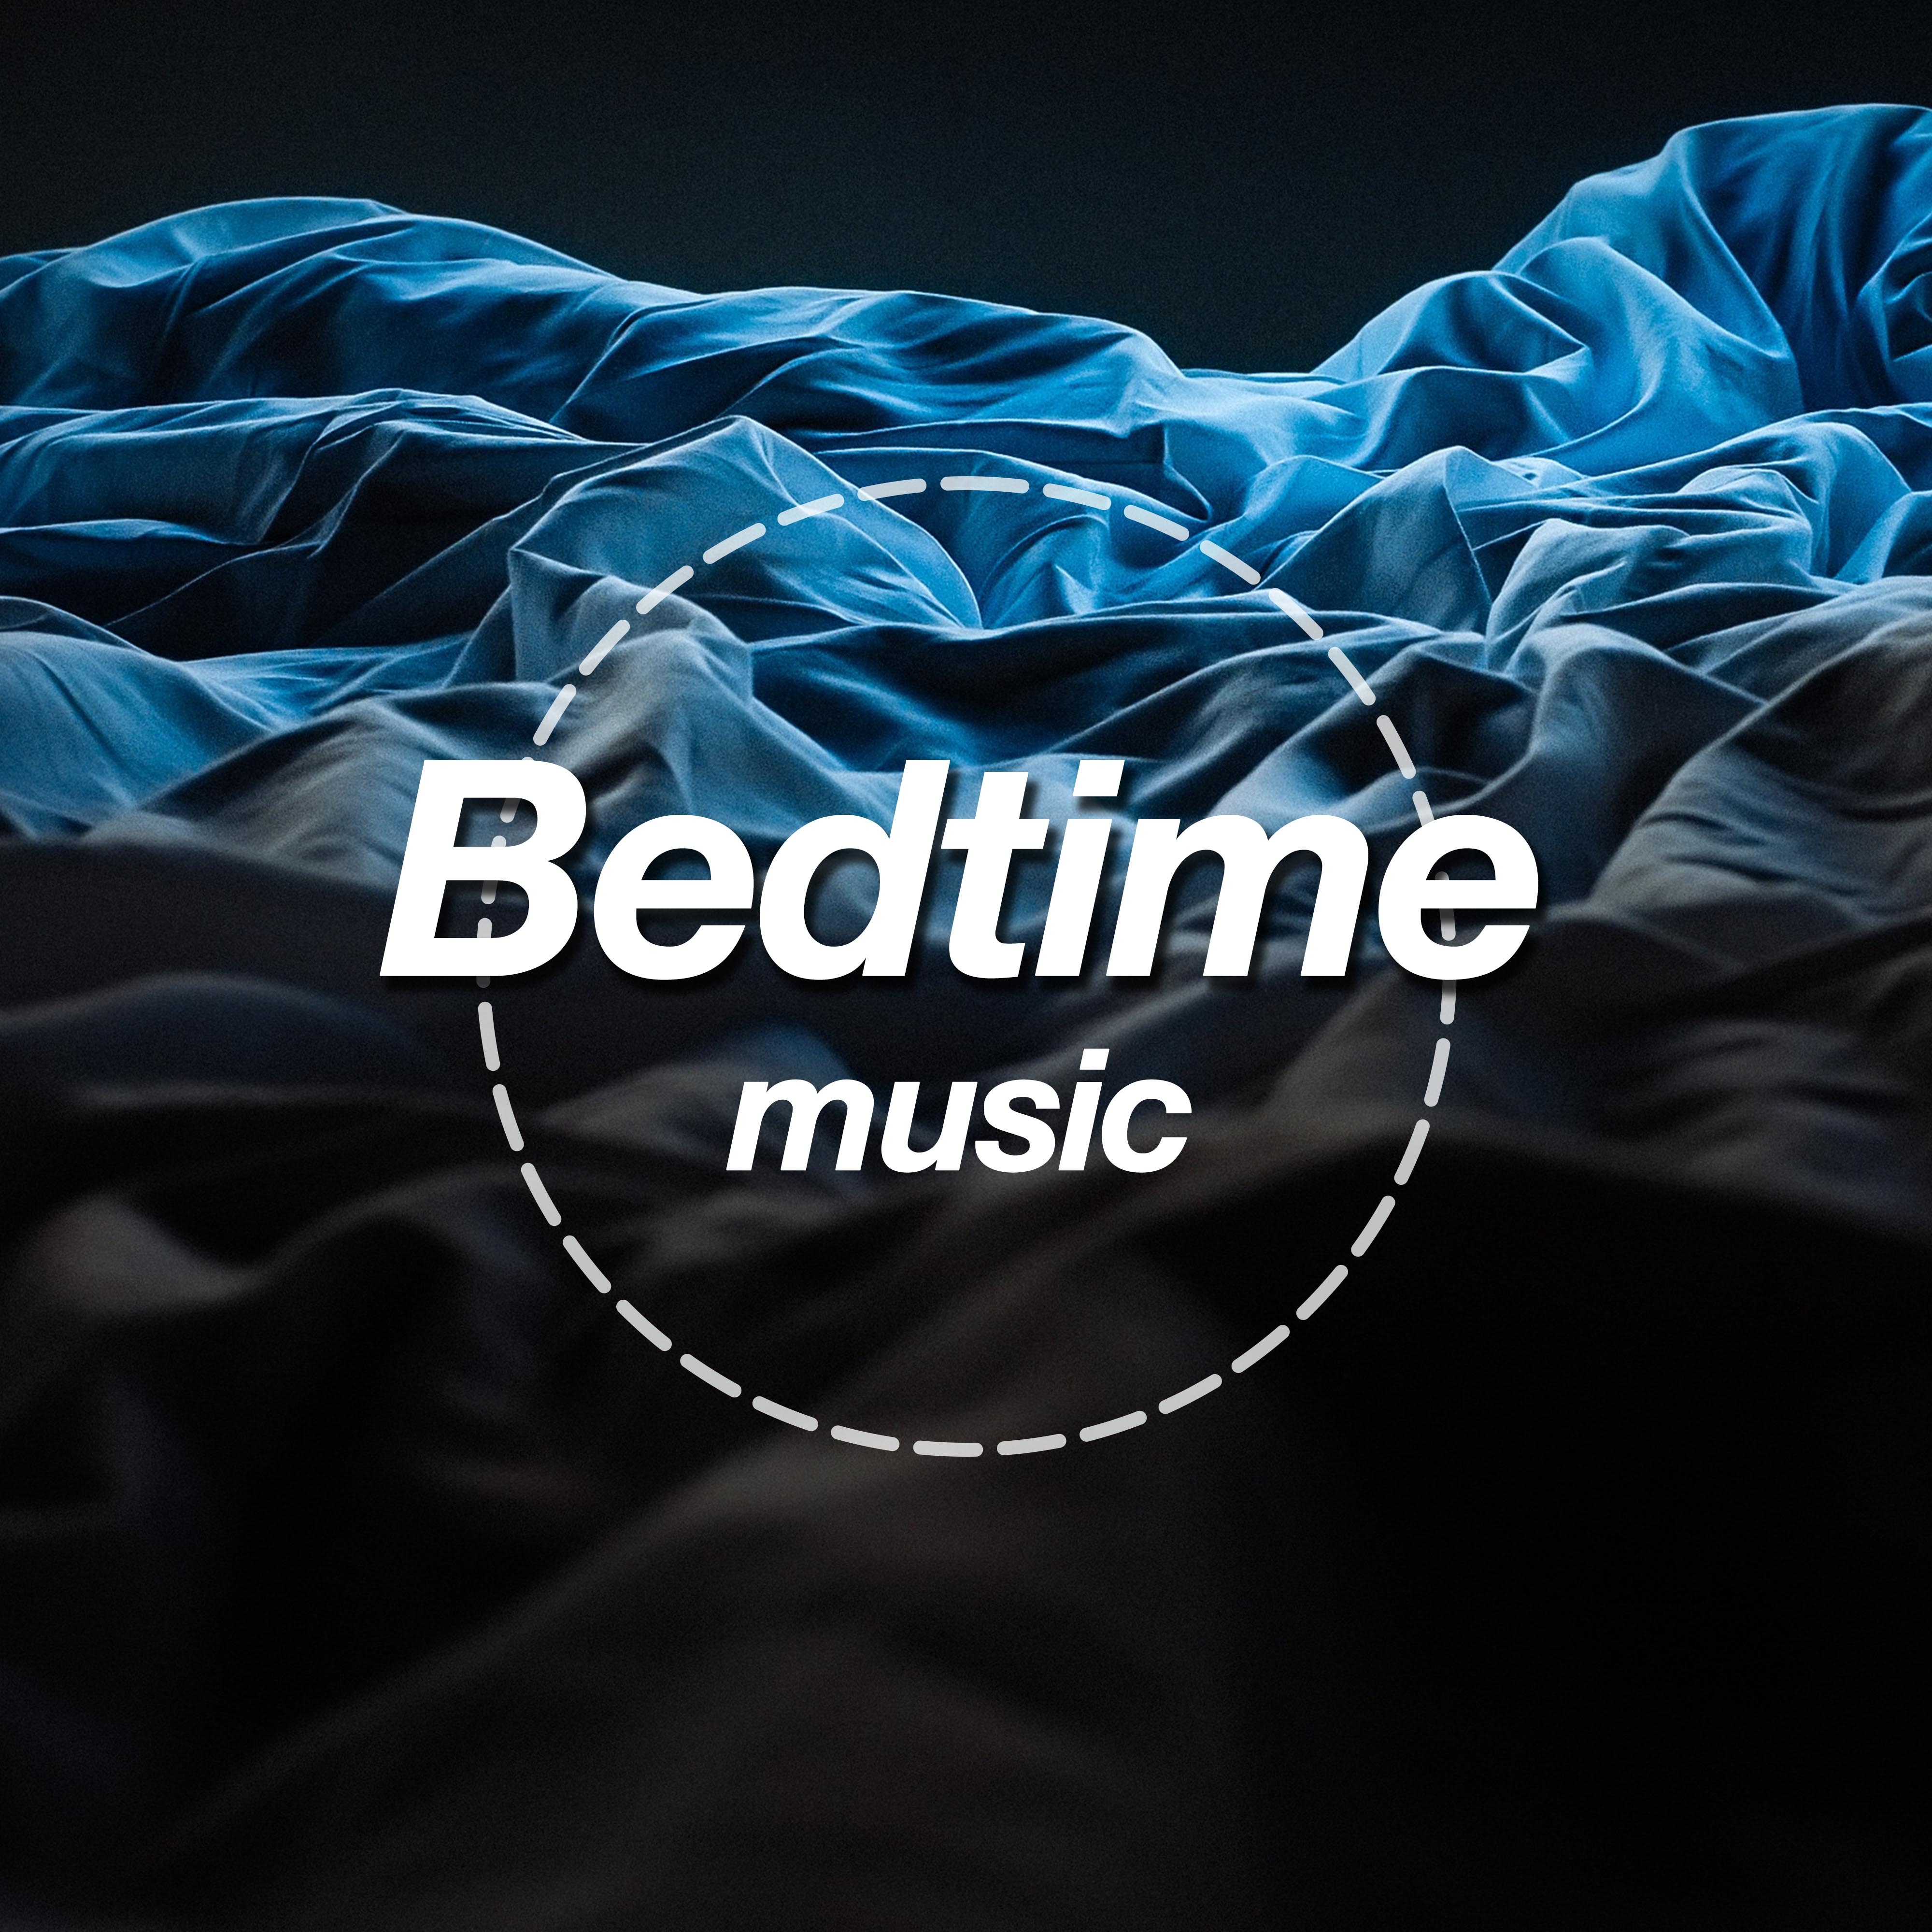 It's Bedtime: an Exclusive Playlist to Soothe the Mind and Unwind after a Stressful Day to Relieve Stress and Anxiety and Sleep Better